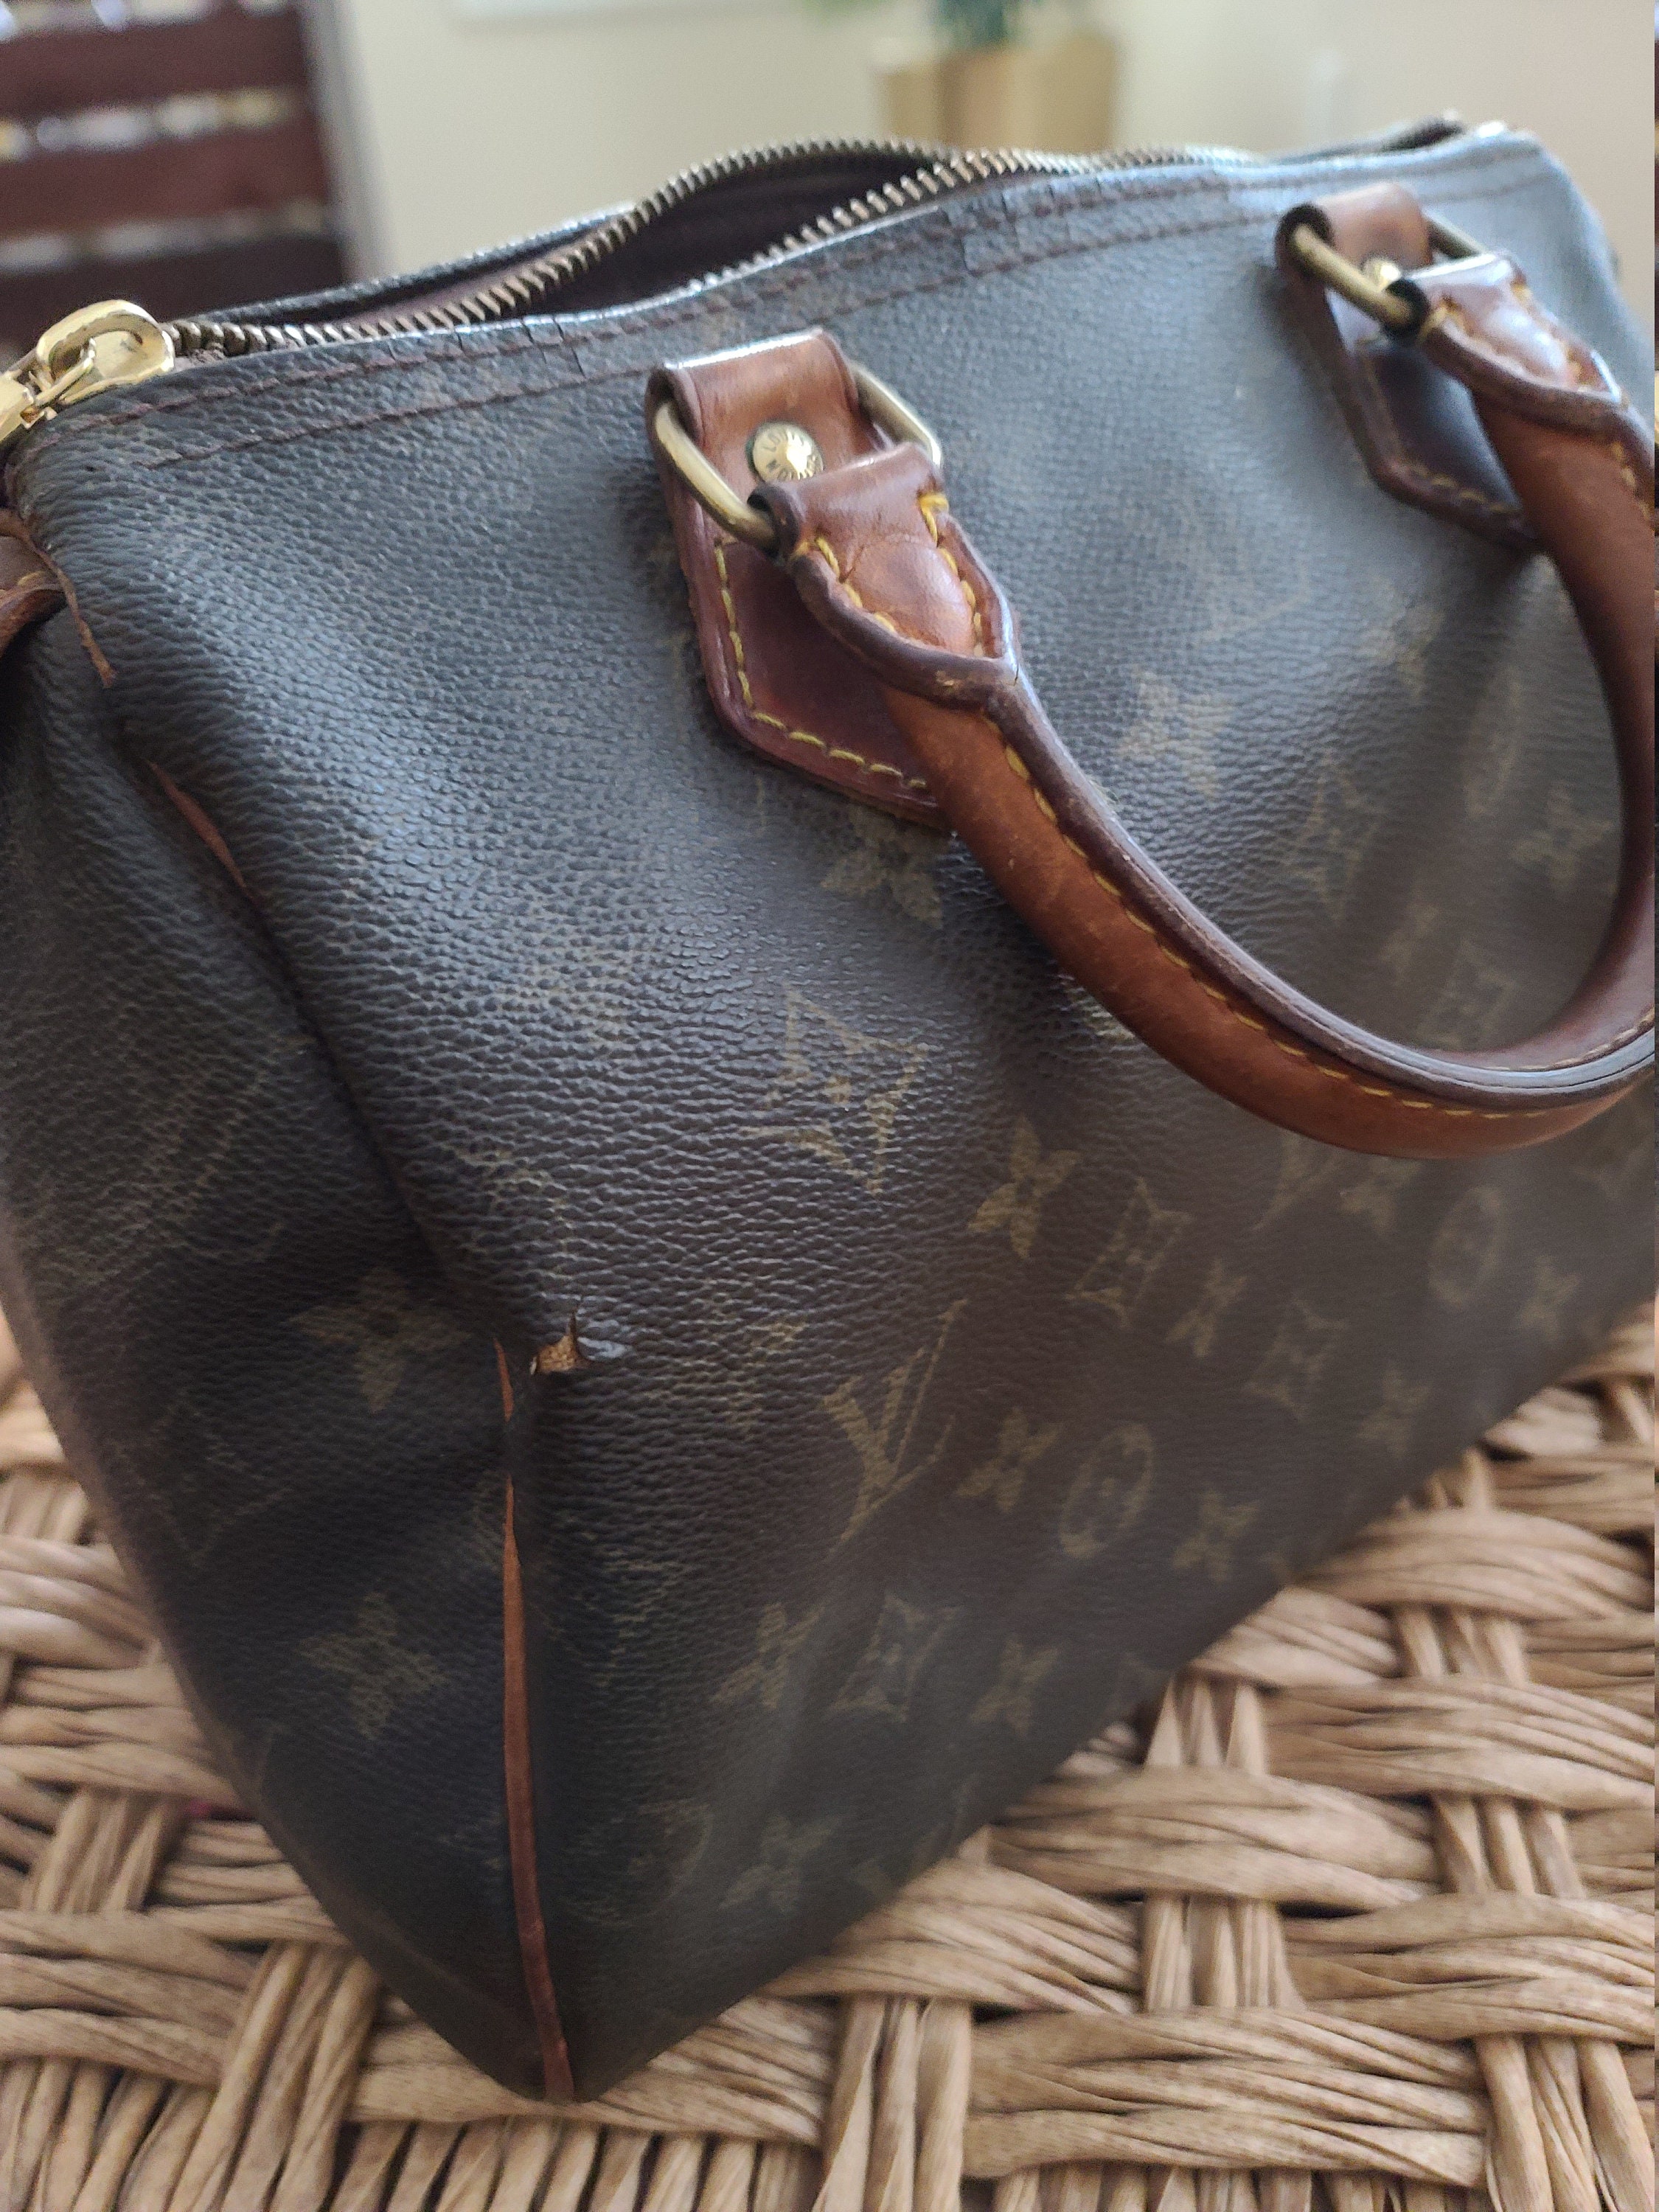 Vintage Gucci Classic Speedy Hand Bag Selected by Anna Corinna